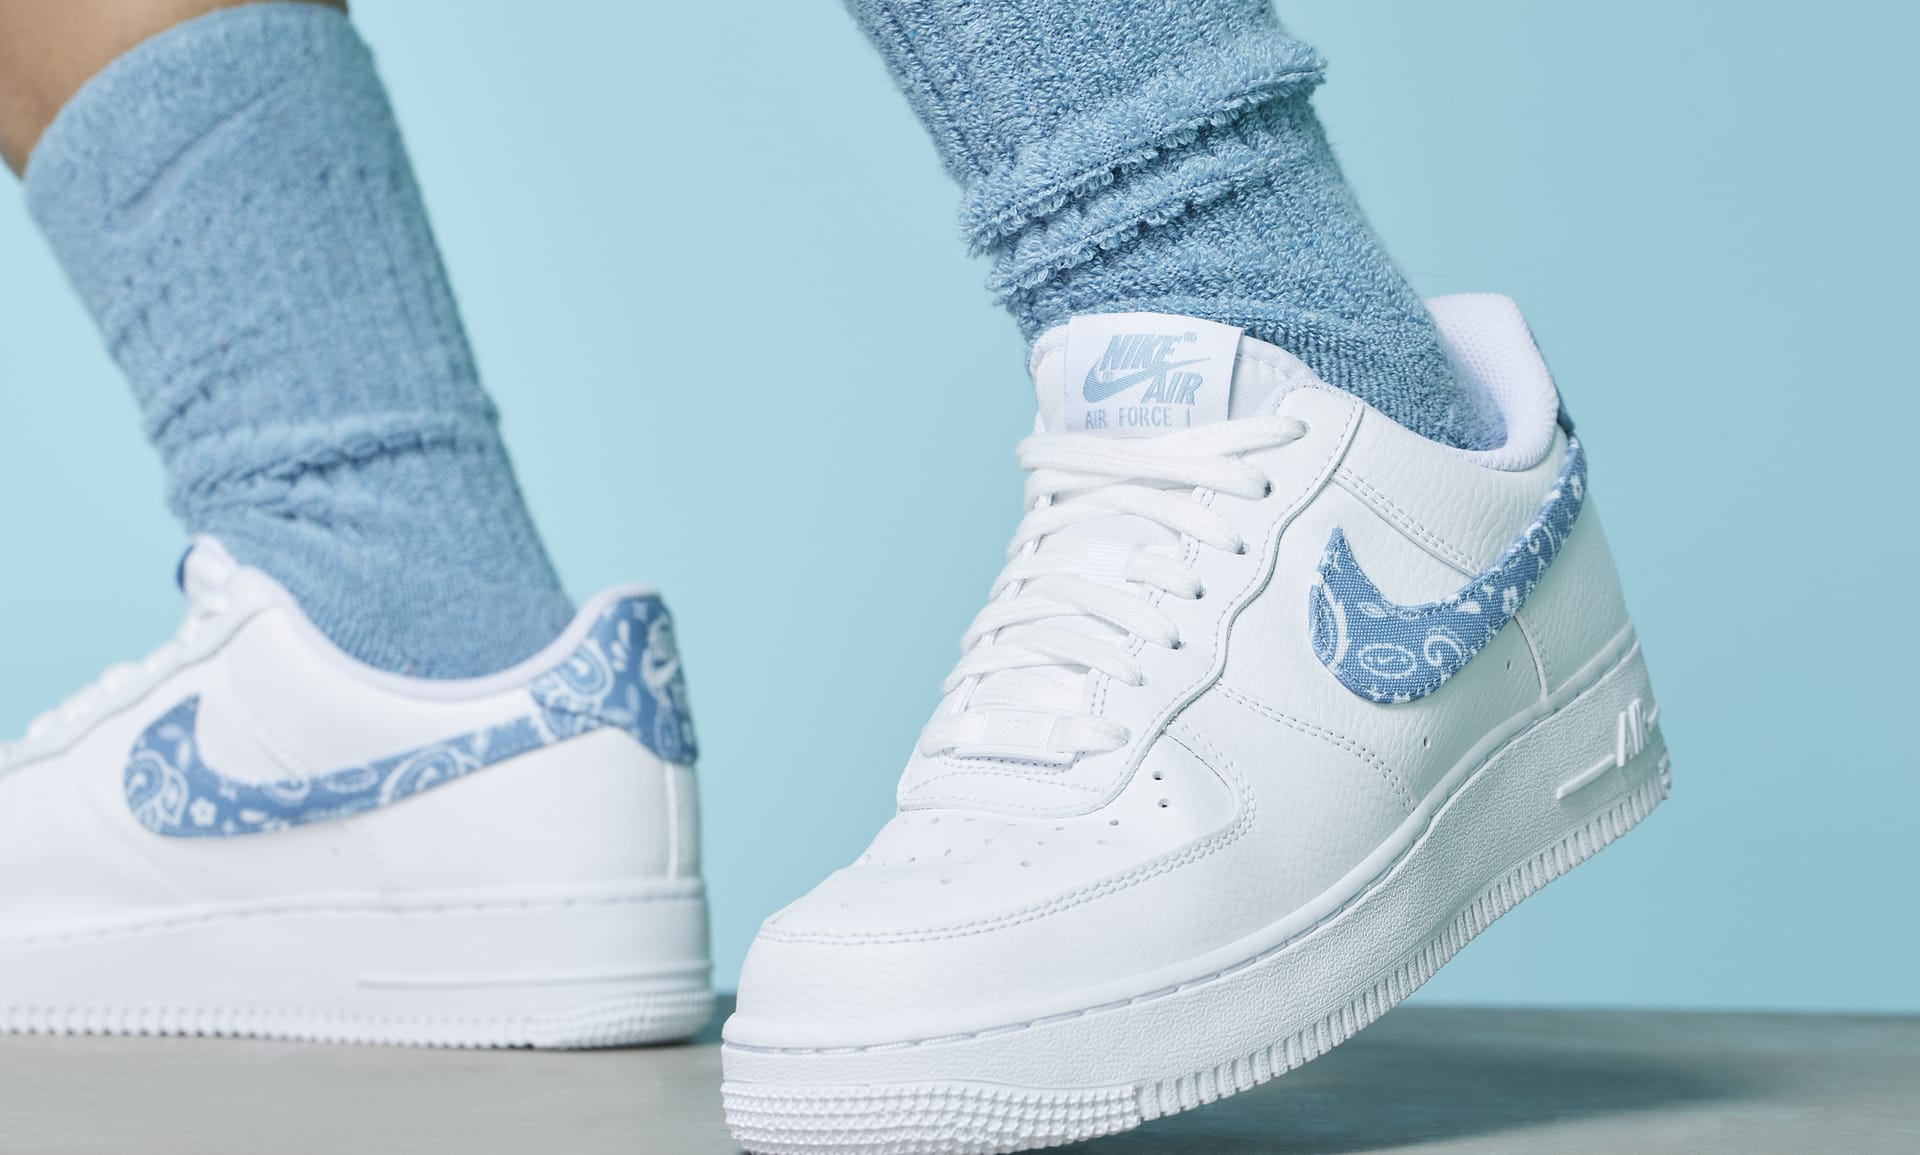 Nike Air Force 1 '07 Essential Women's Shoes. Nike.com خلاط دش مدفون